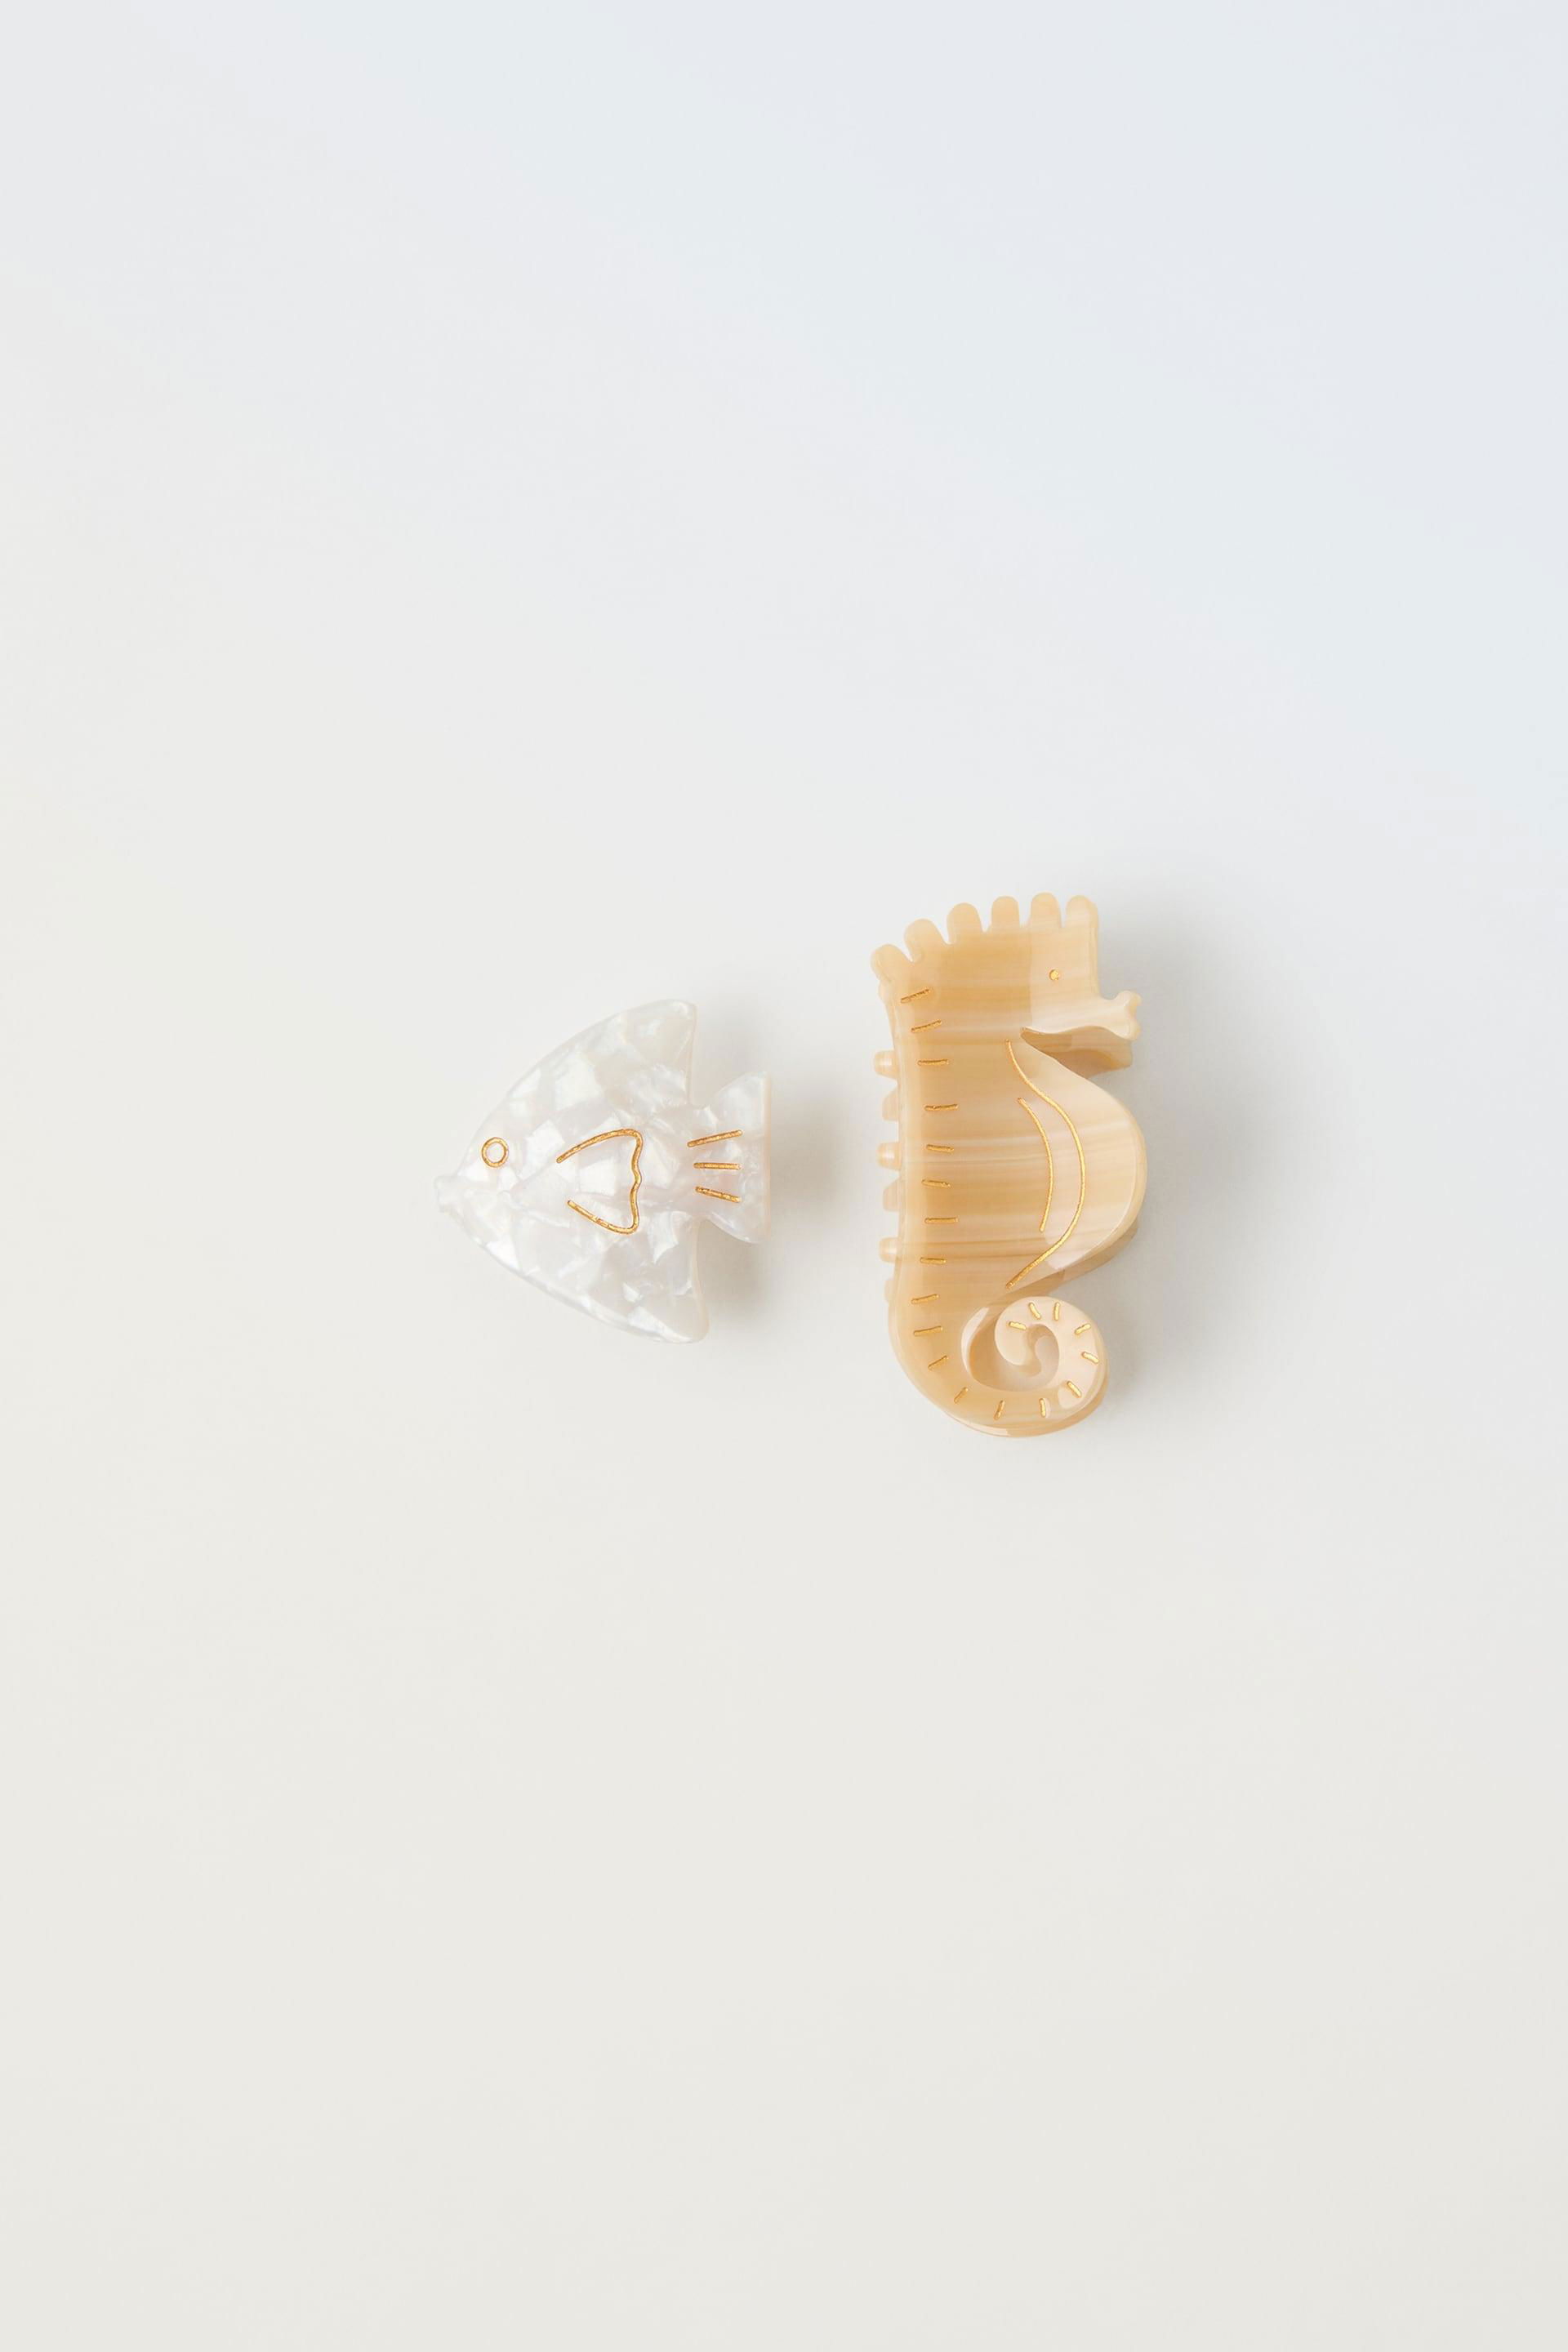 2-PACK OF SEAHORSE AND FISH HAIR CLIPS by ZARA